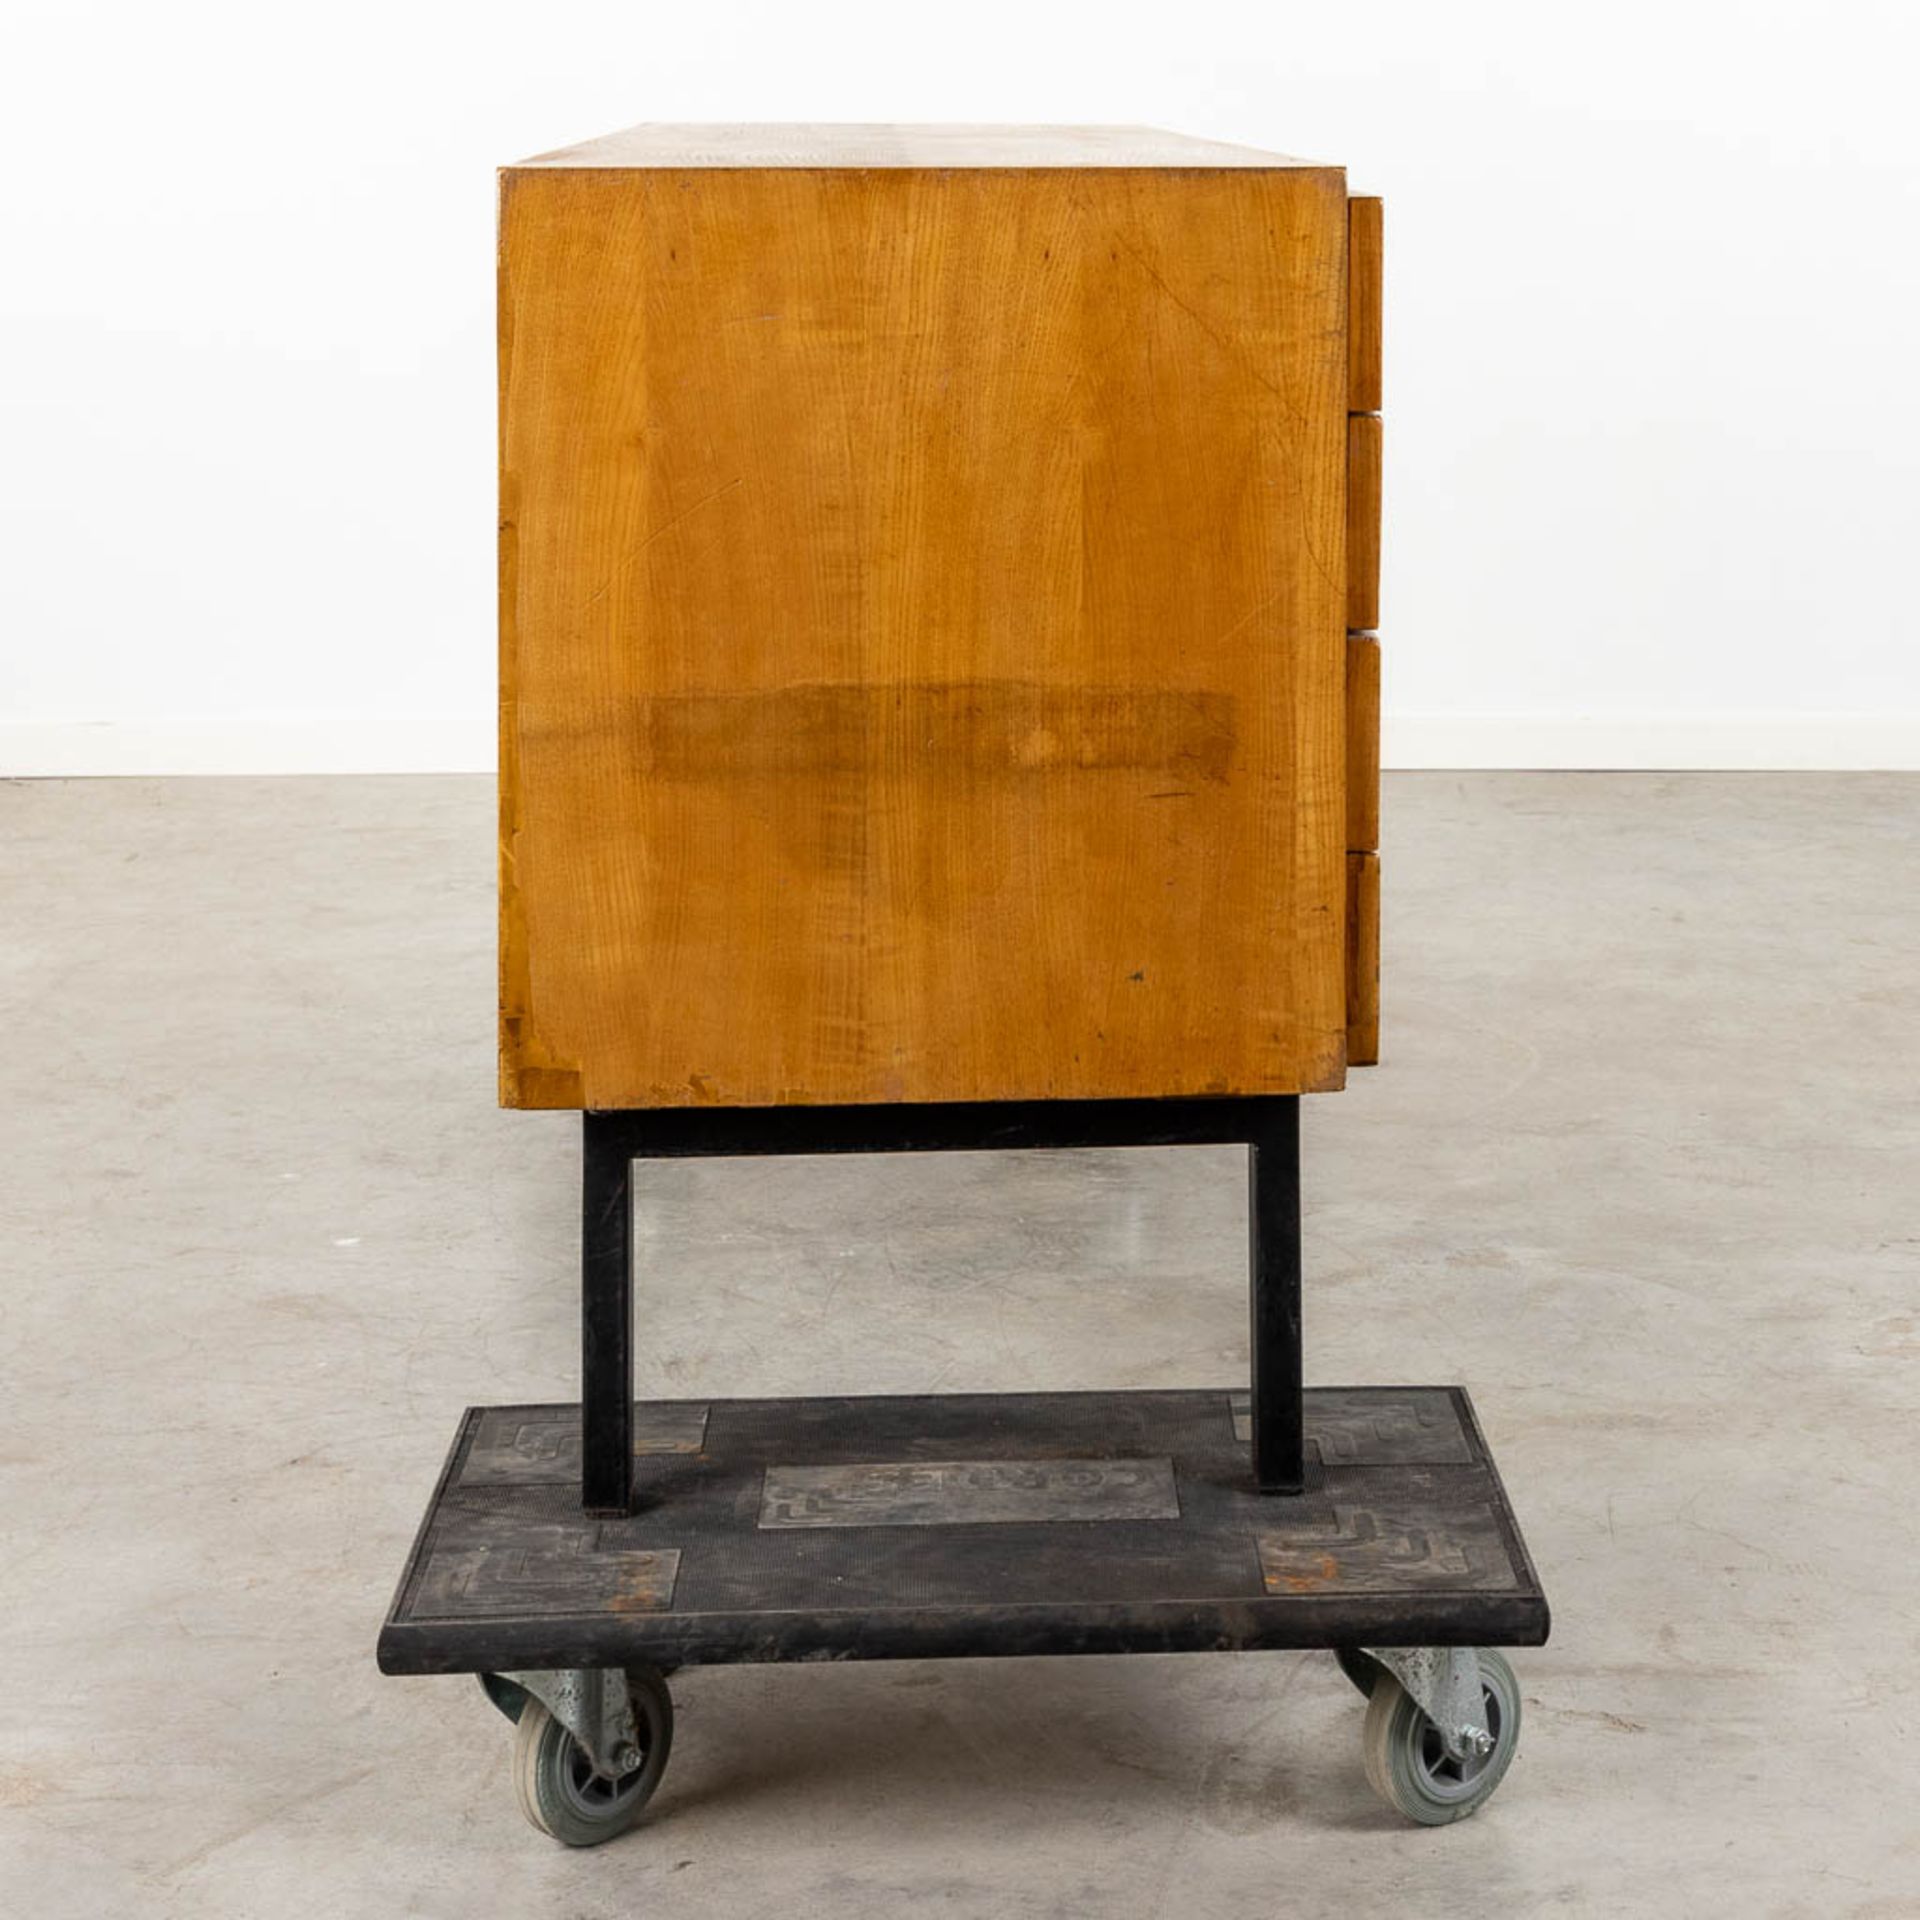 Charlotte PERRIAND (1903-1999) 'Cansado' a sideboard (D:47 x W:158 x H:73 cm) - Image 8 of 16